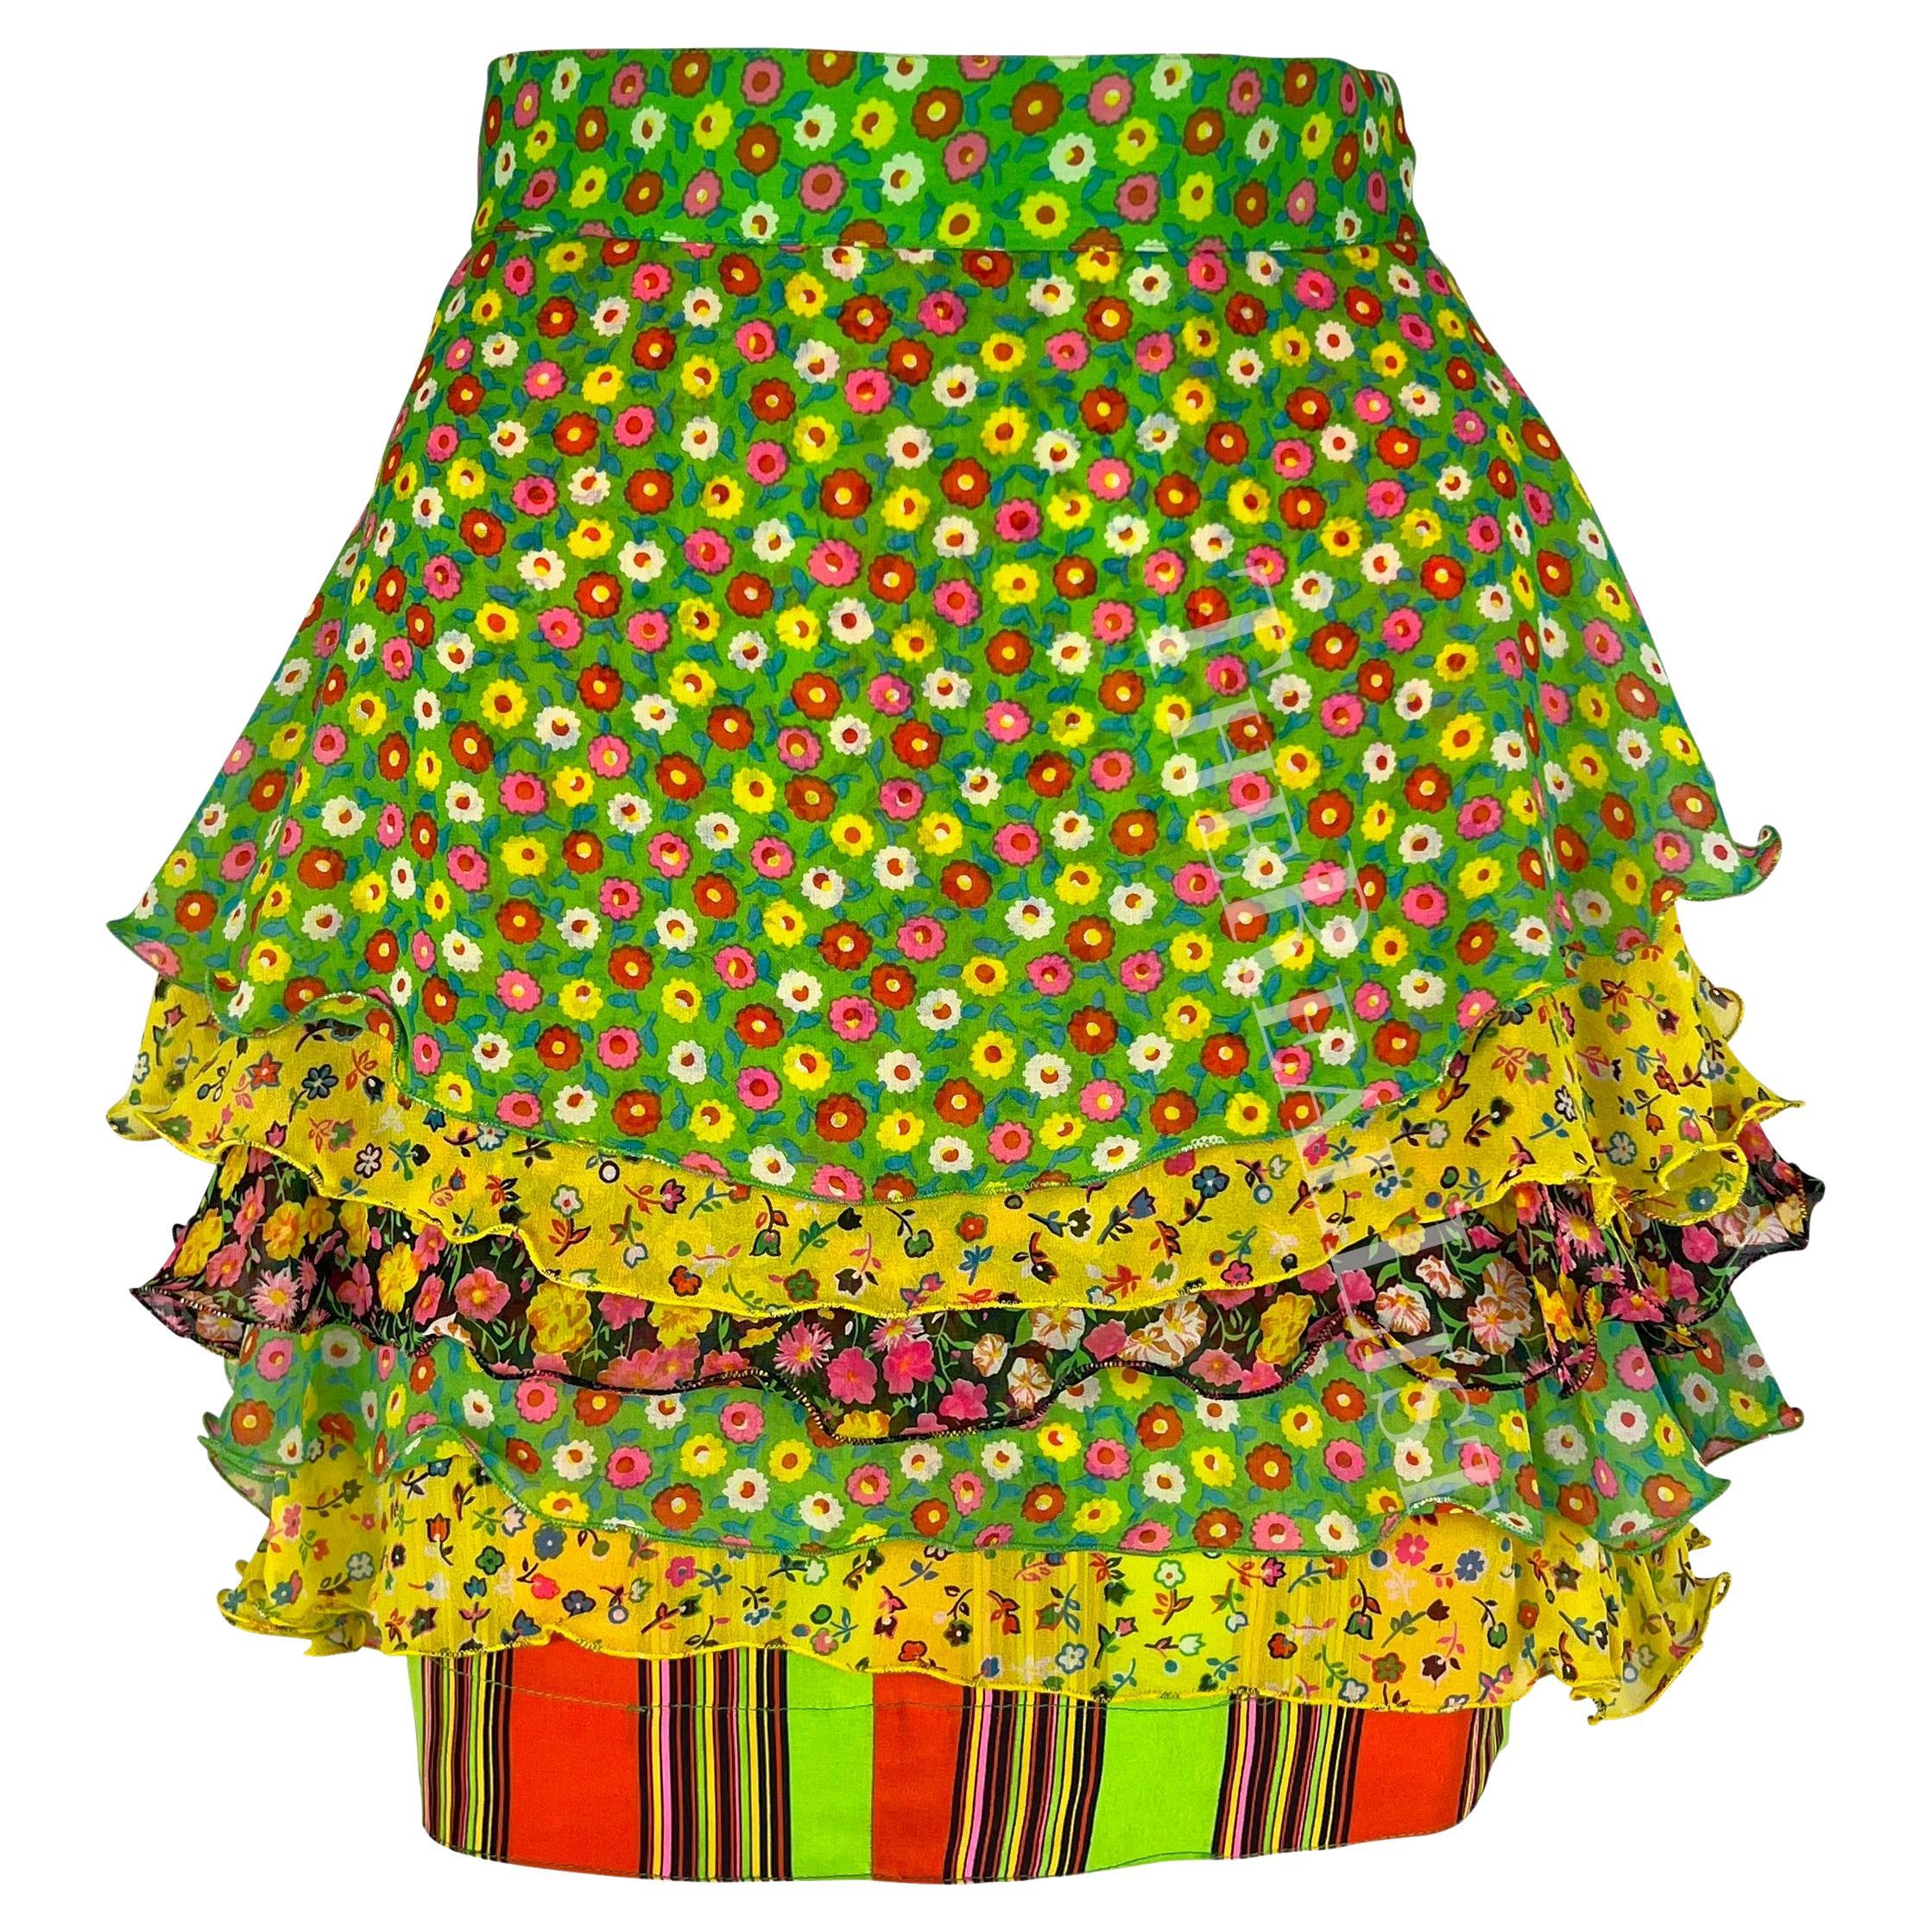 S/S 1993 Gianni Versace Tiered Floral Multicolor Runway Mini Skirt For Sale